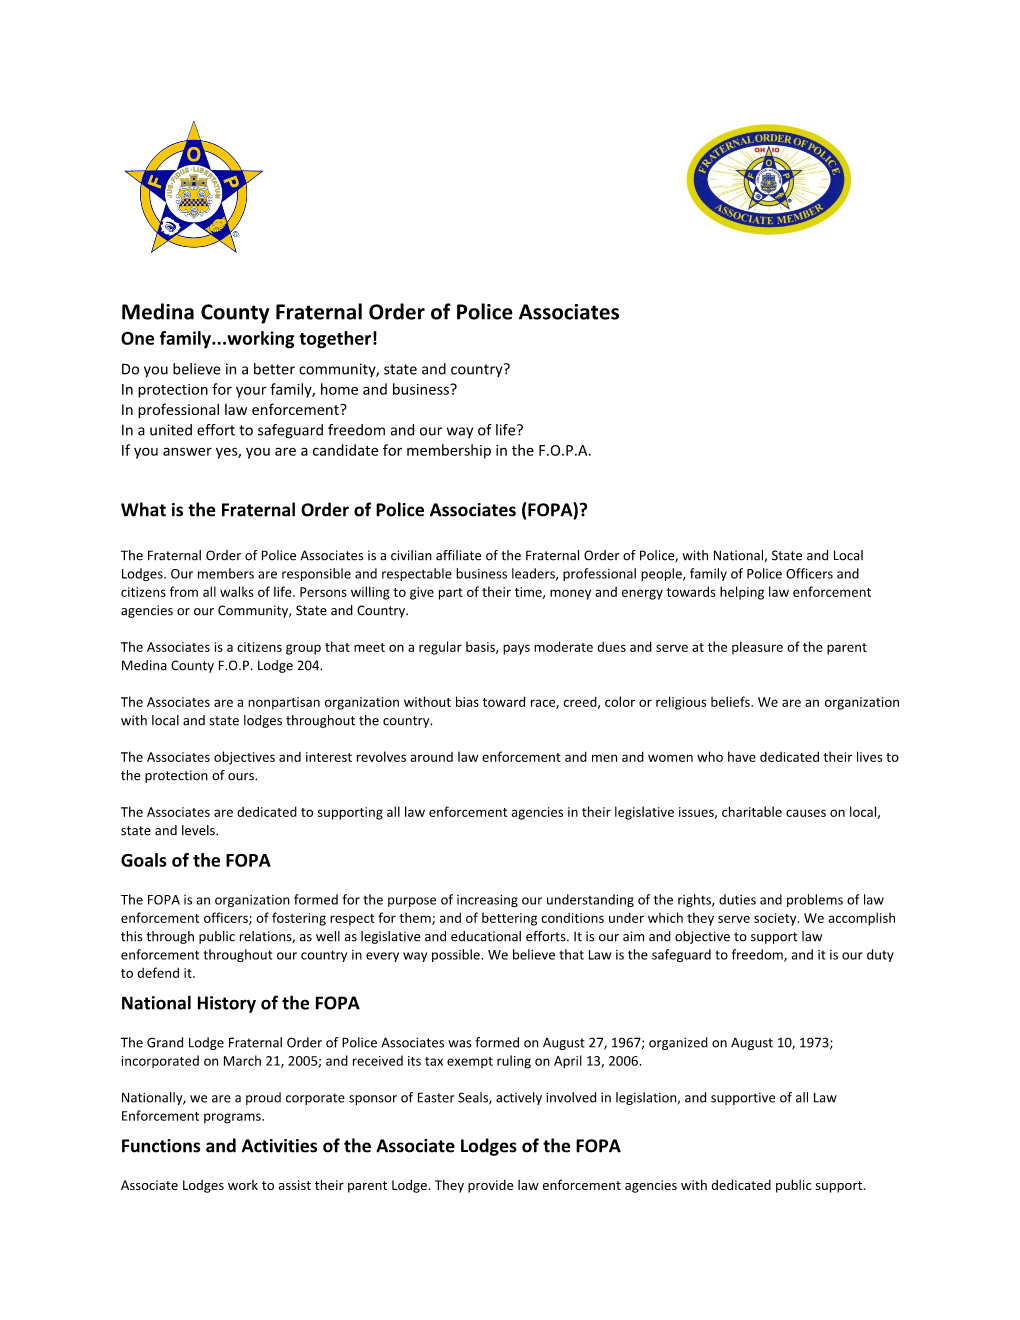 Medina County Fraternal Order of Police Associates One Family Working Together!